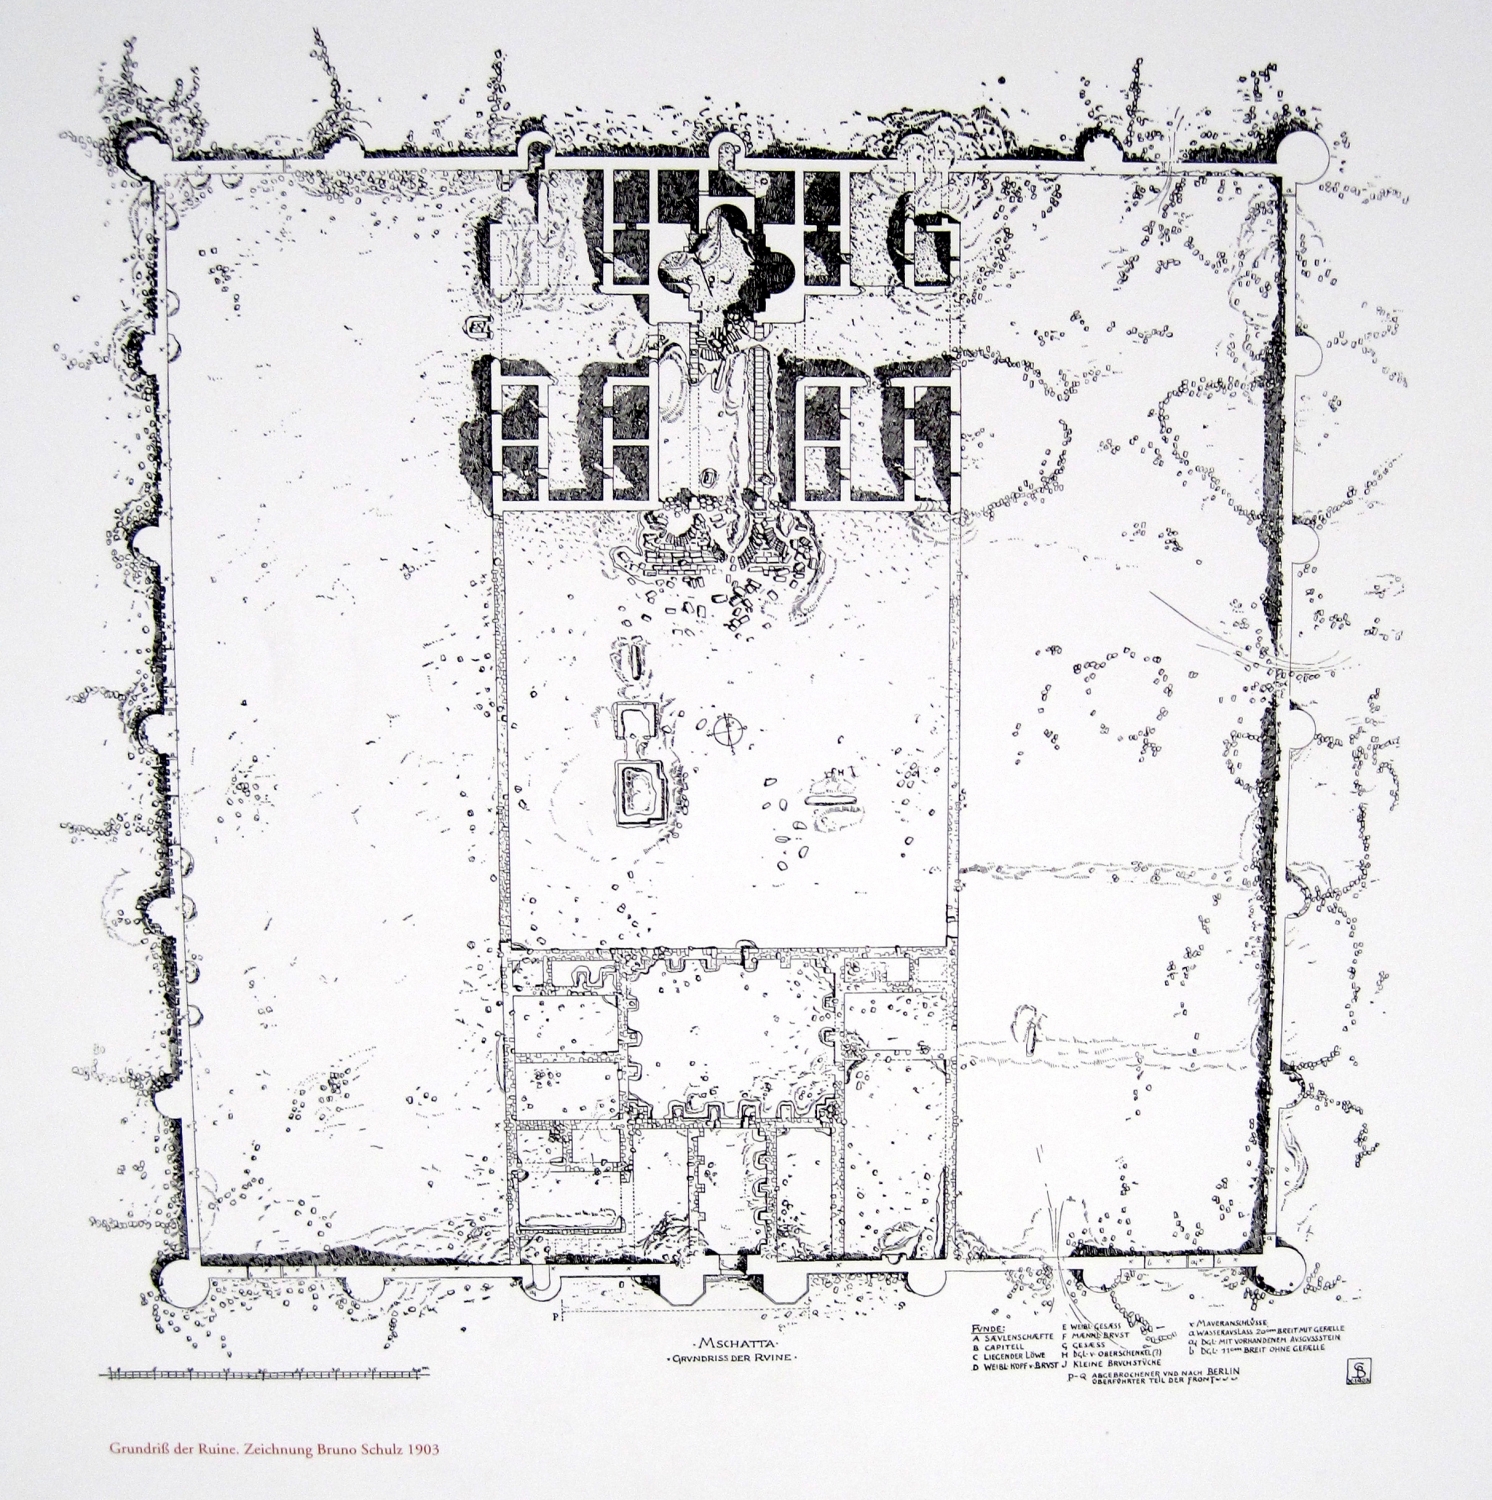 Plan of the ruins at Mshatta, drawn by Bruno Schulz, displayed in the Pergamon Museum